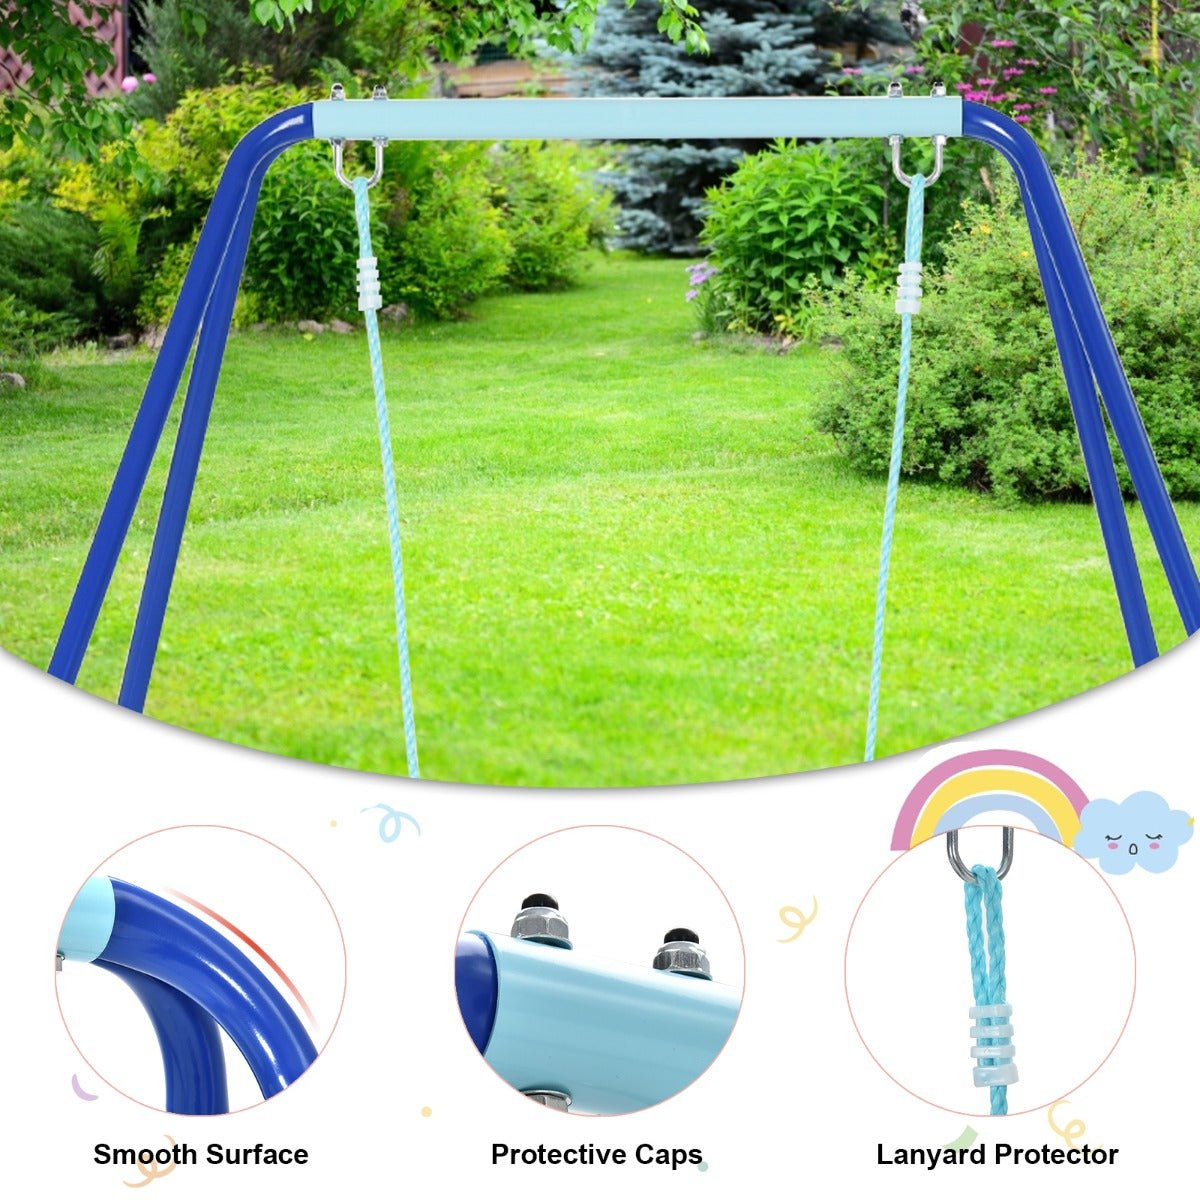 Blue Metal Swing Set: A-Frame Stability for Outdoor Fun